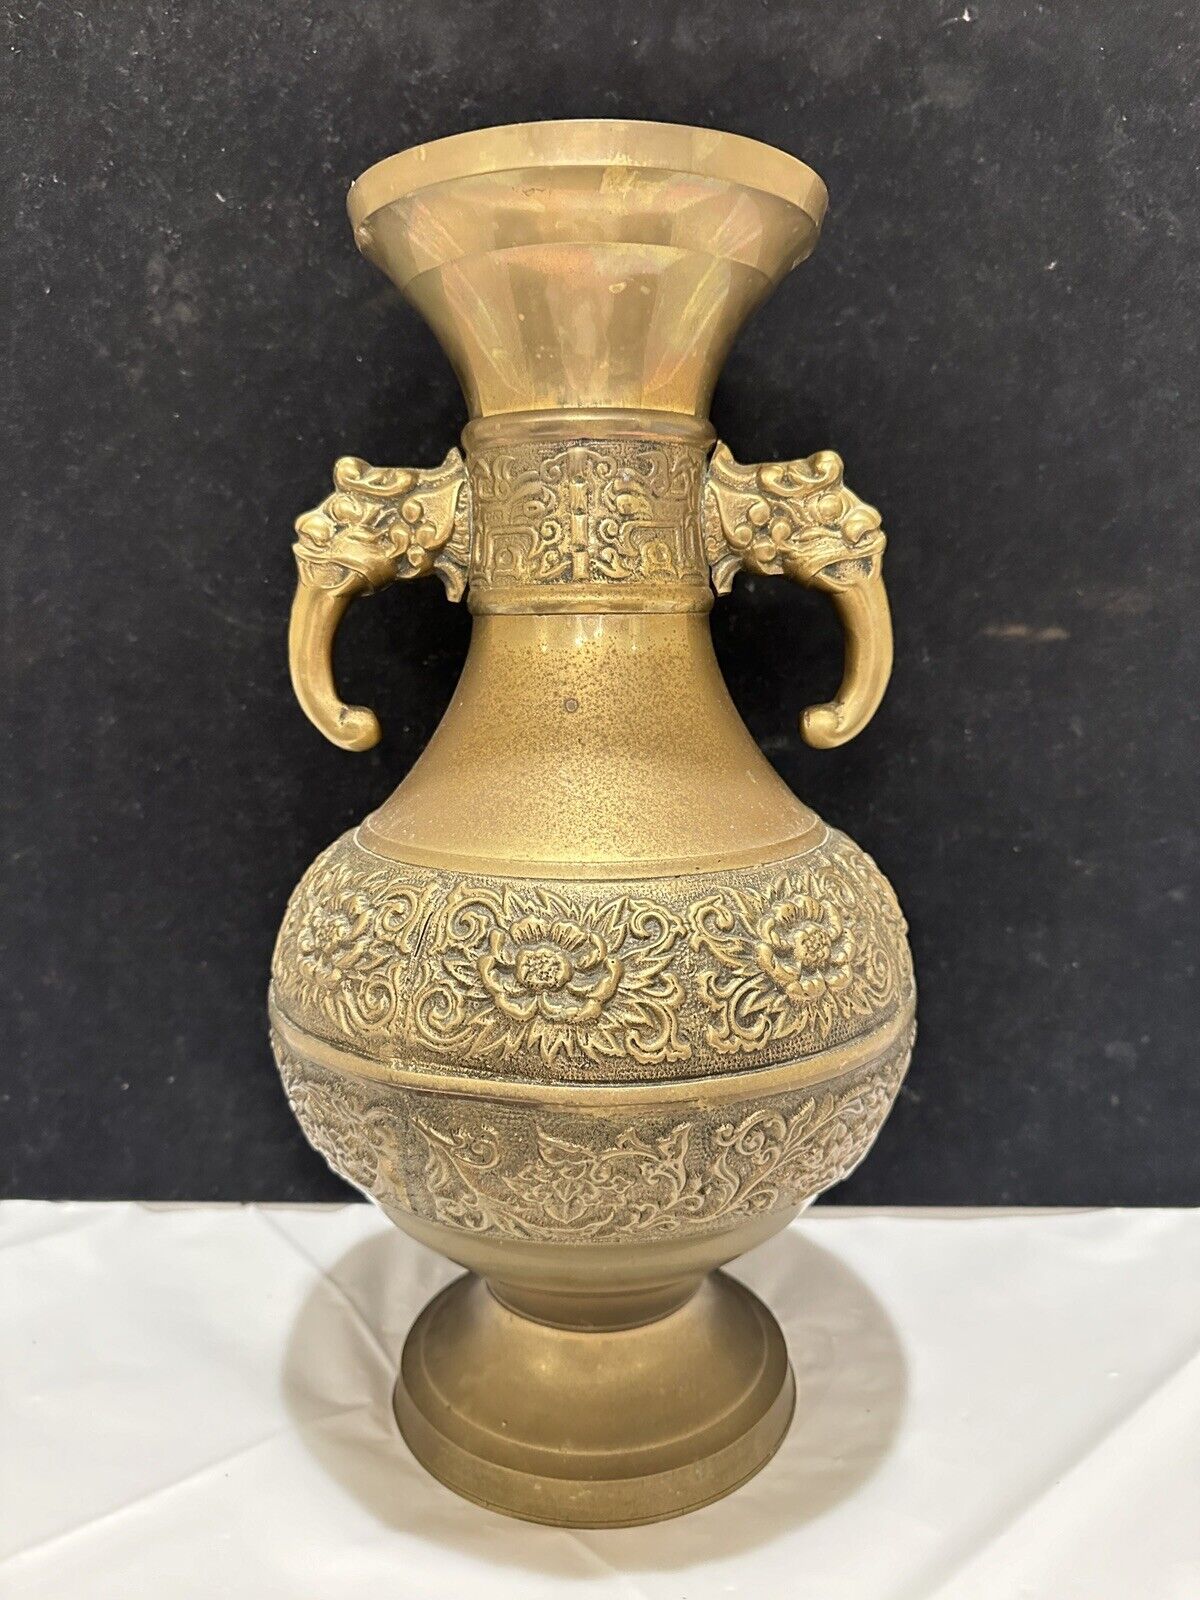 Large Antique Handmade Engraved Solid Brass Vase with Foo Dragon Handles 15”